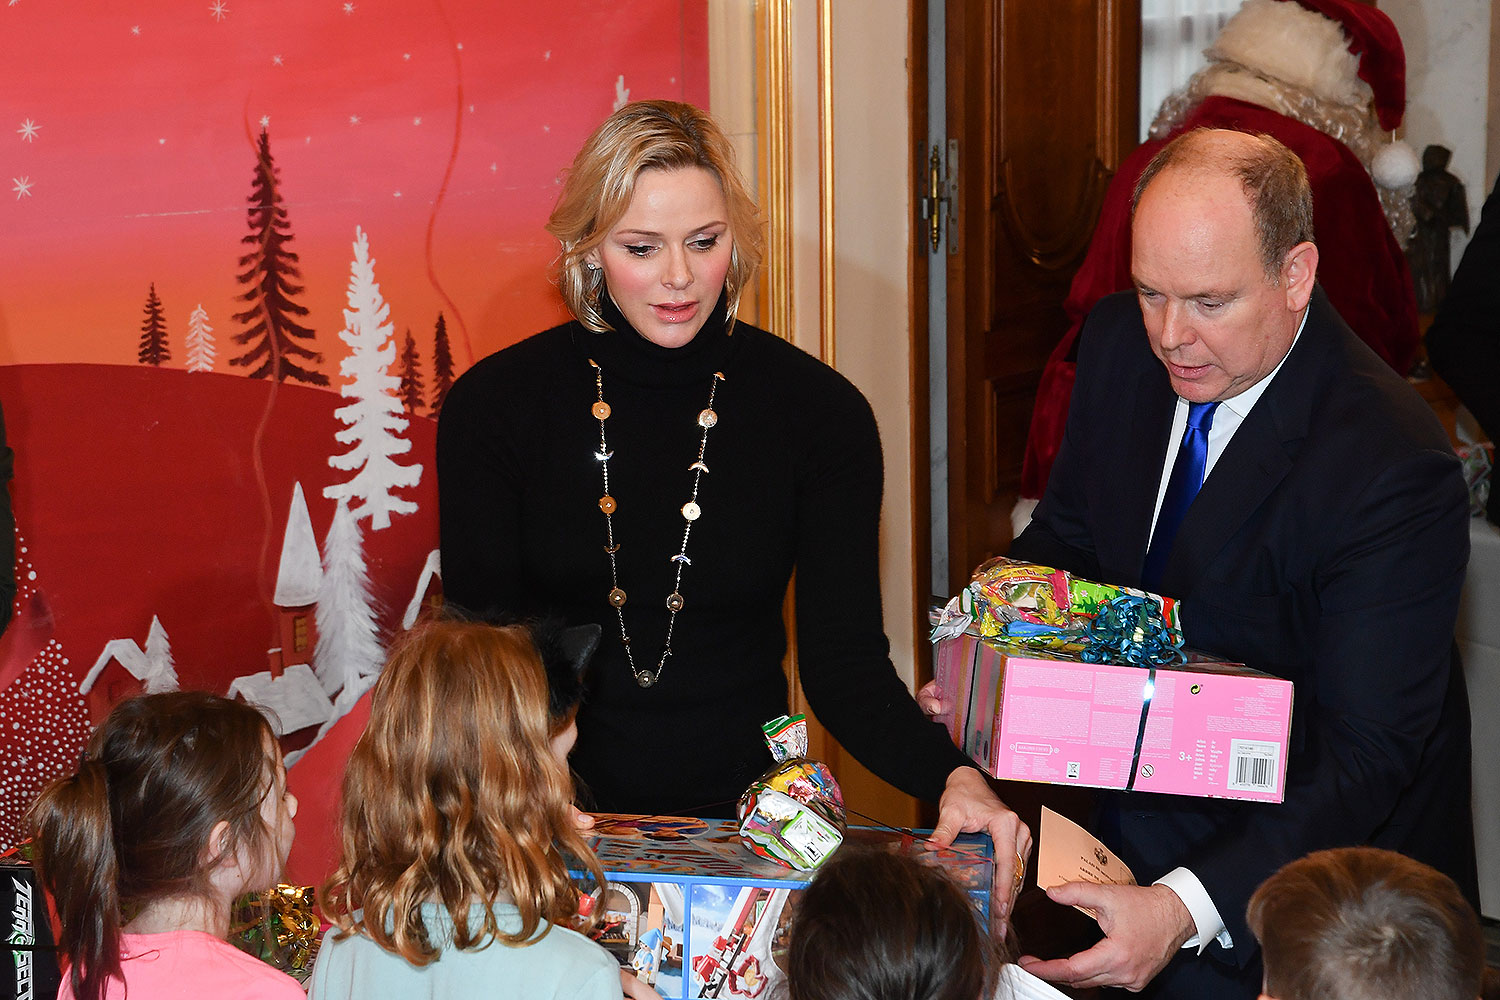 Princess Charlene of Monaco and Prince Albert II of Monaco attend the Christmas Gifts Distribution At the Palace